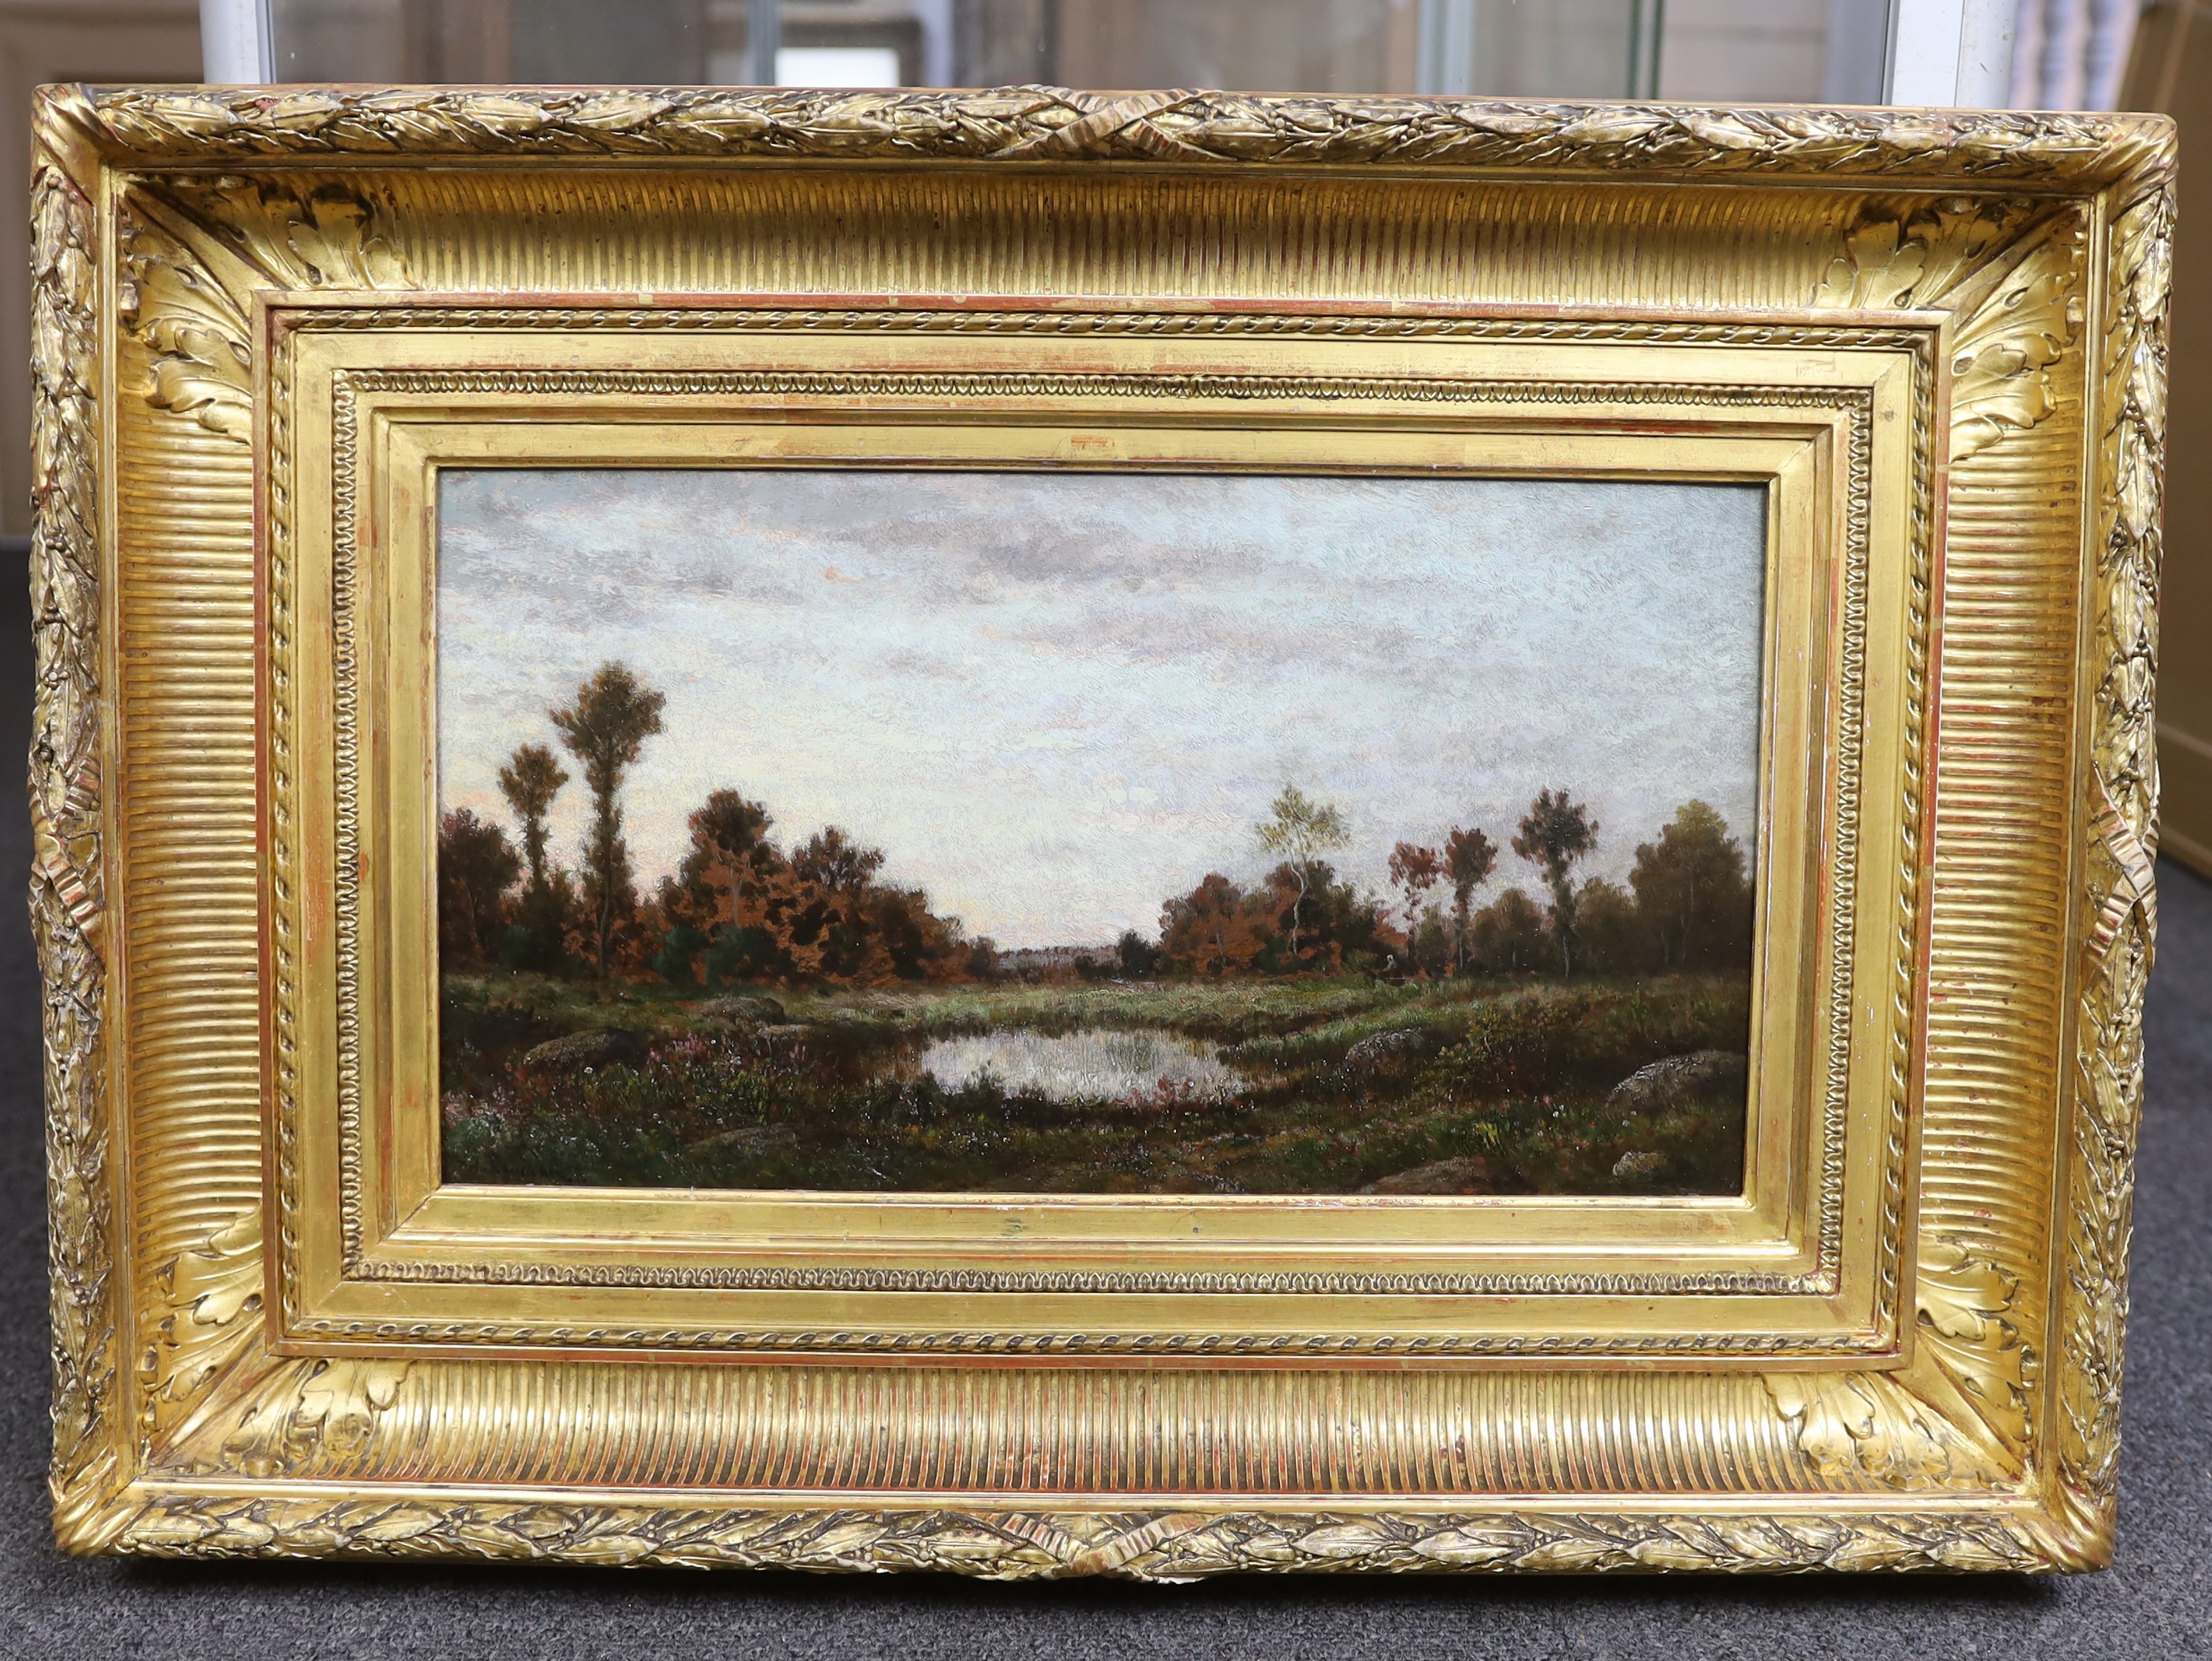 Theodore Rousseau (French, 1812-1867), Paysage à la Mare c.1845-50, oil on wooden panel, 23 x 43cm